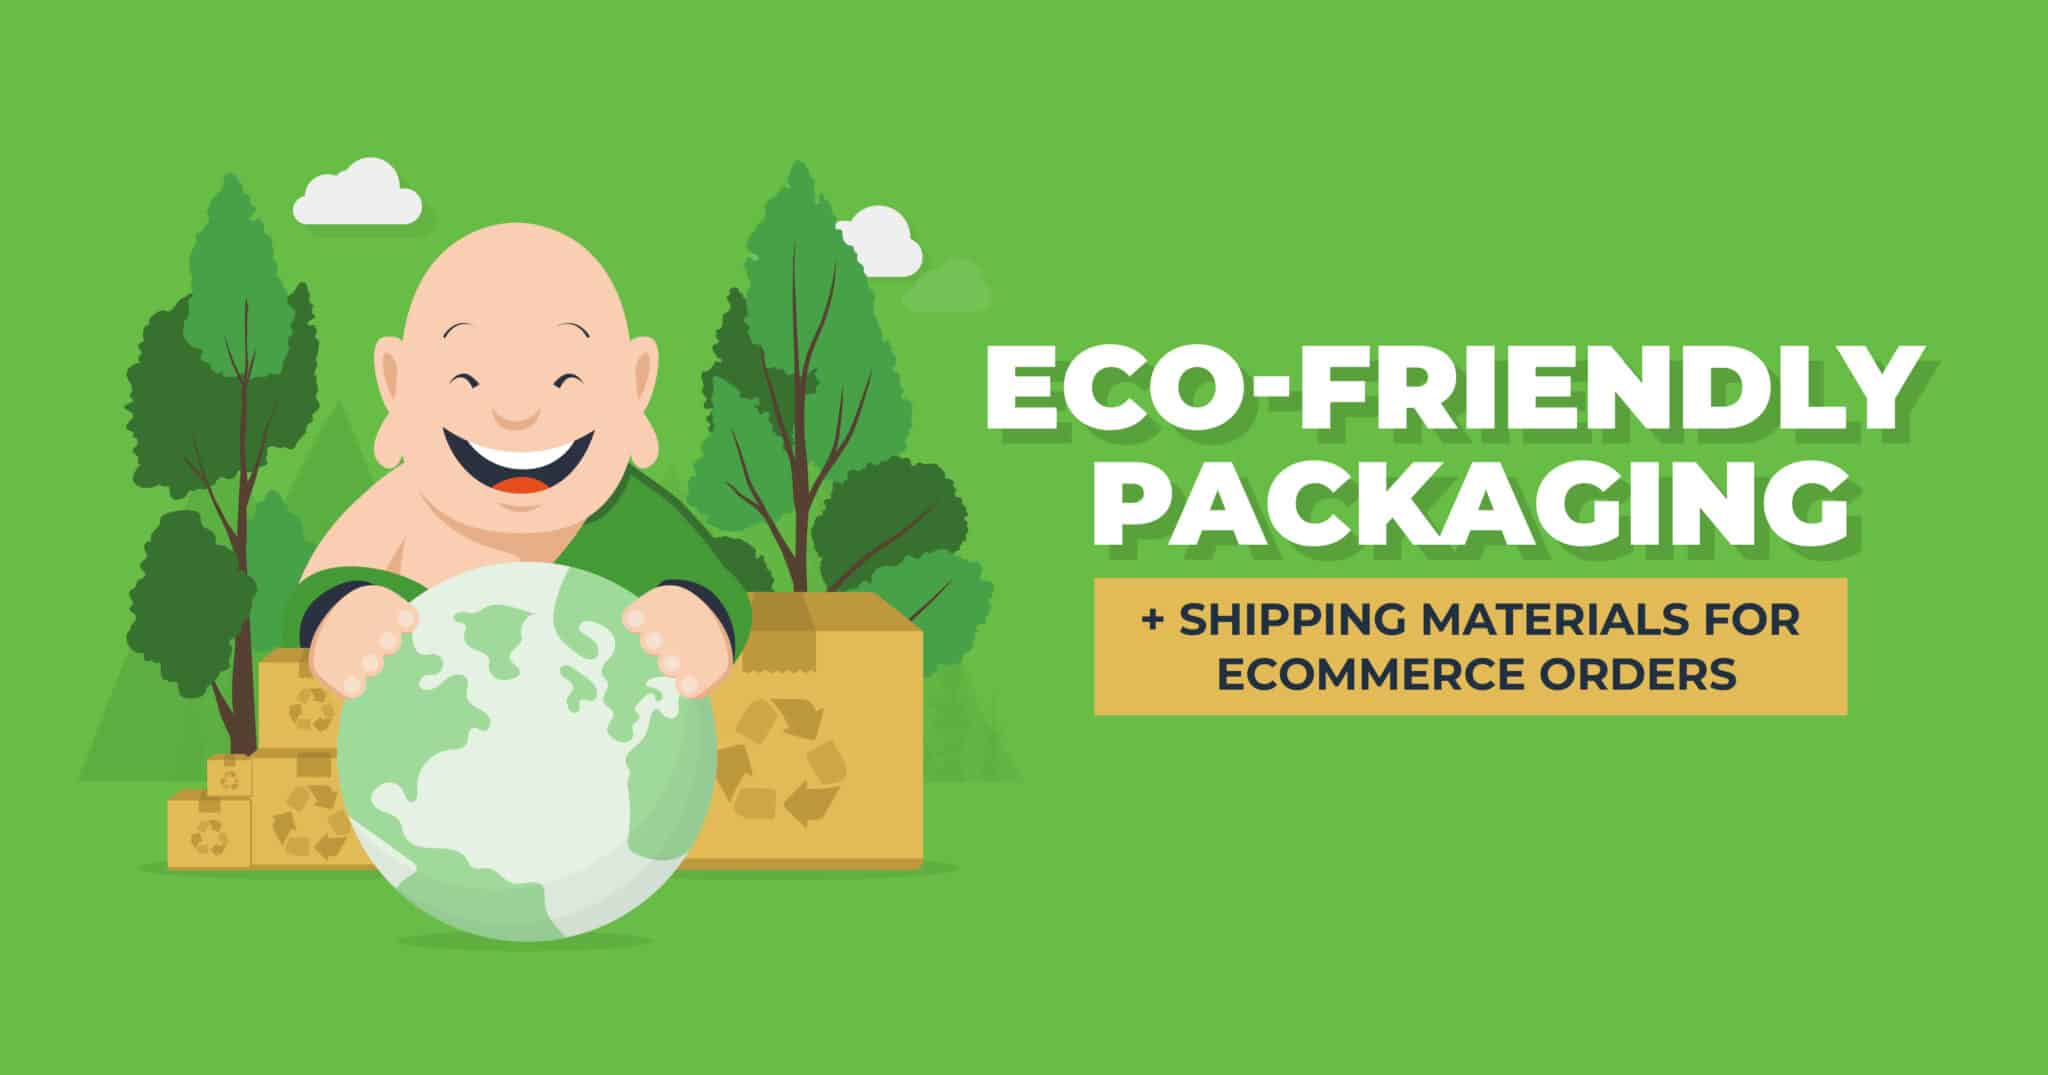 https://www.shipmonk.com/wp-content/uploads/2023/02/Eco-Friendly-Packaging-Shipping-Materials-For-Ecommerce-Orders-Landscape-scaled.jpg